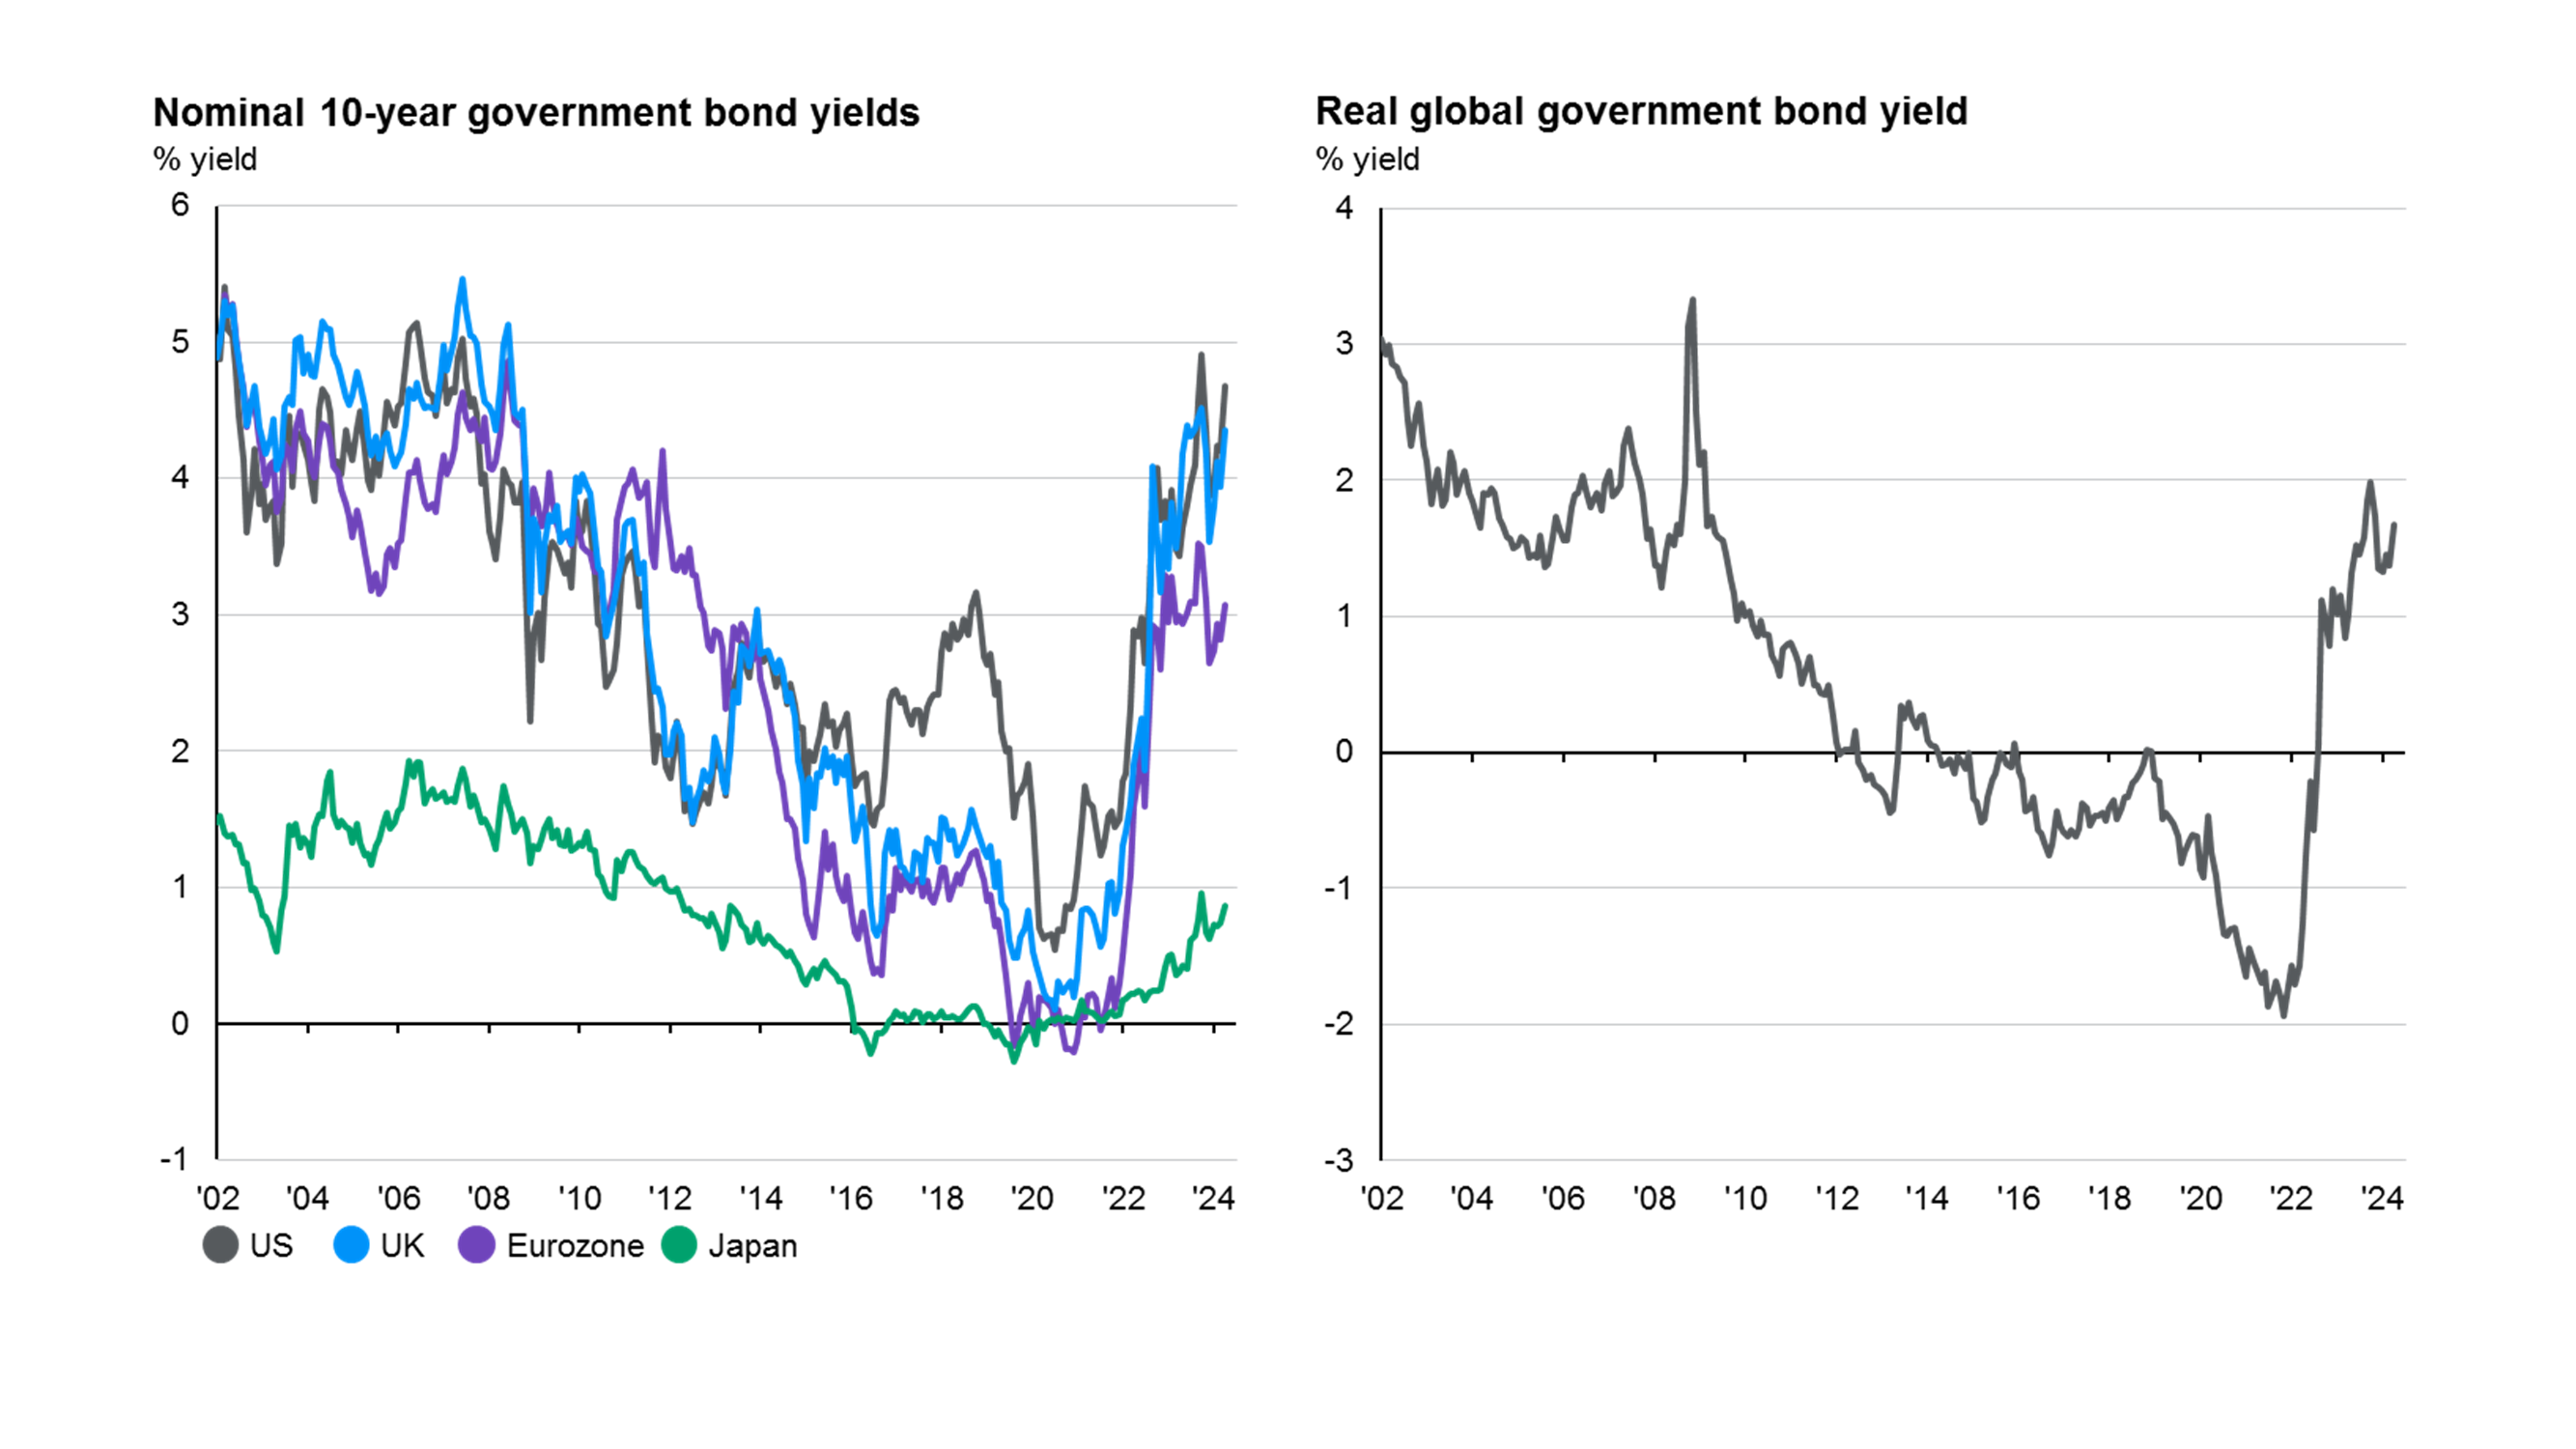 Fixed income yields